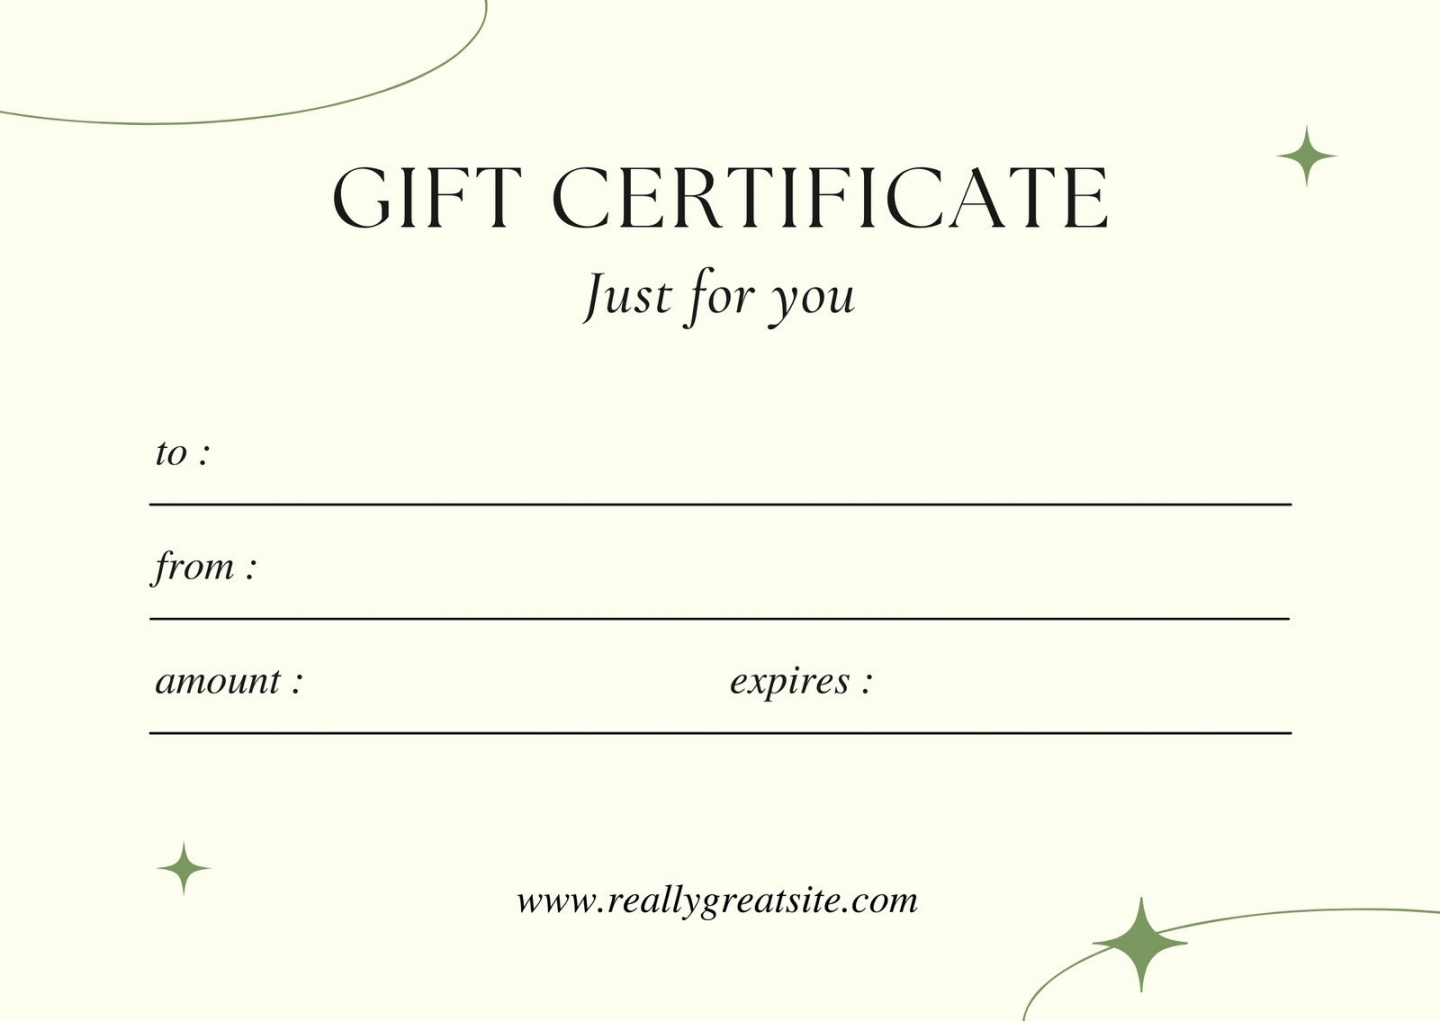 Free Printable Gift Certificate Templates - Printable - Page  - Free, printable gift certificate templates to customize